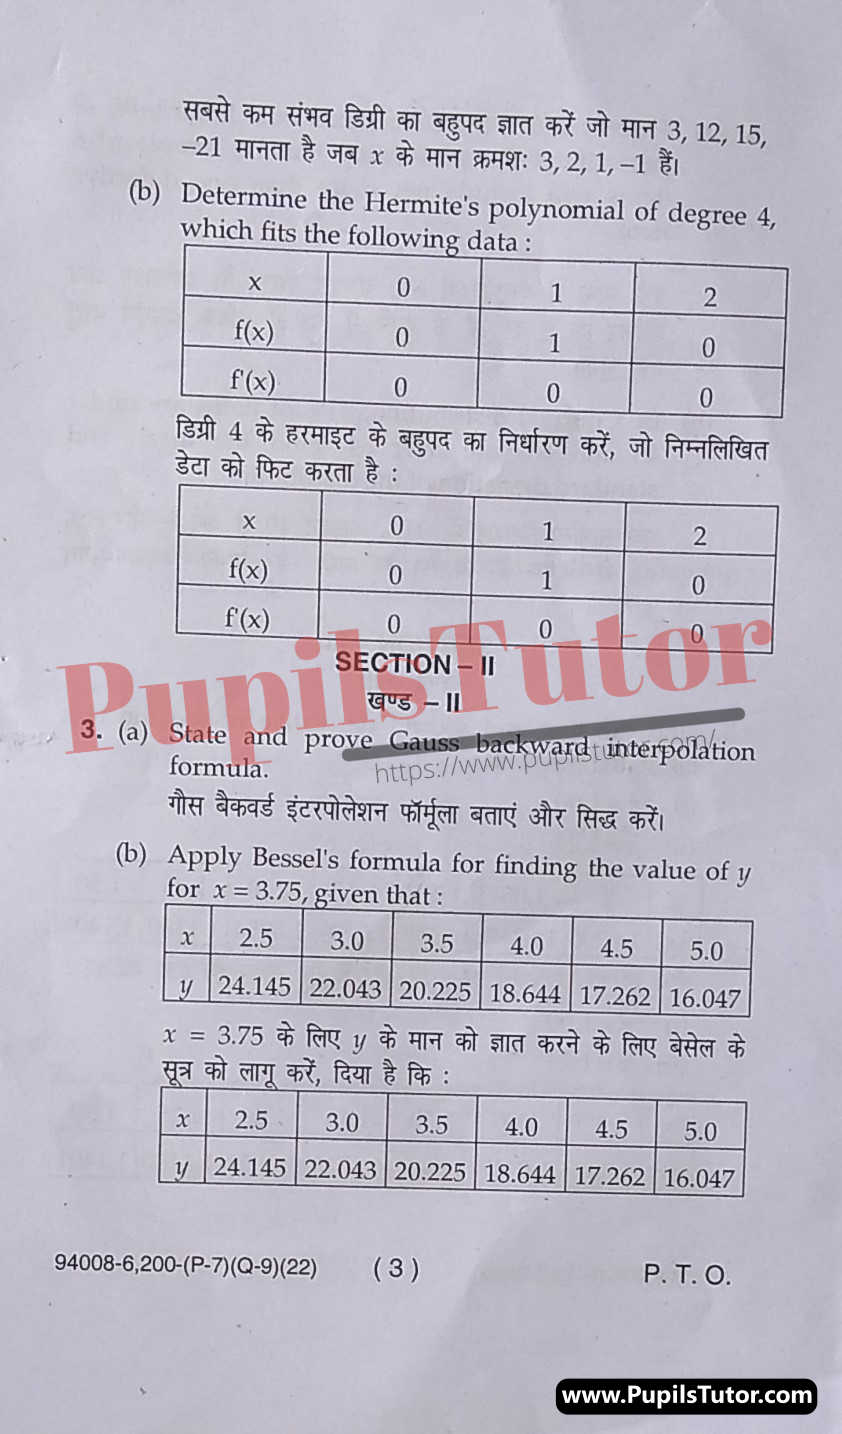 Free Download PDF Of M.D. University B.Sc. [Mathematics] 5th Semester Latest Question Paper For Numerical Analysis Subject (Page 3) - https://www.pupilstutor.com